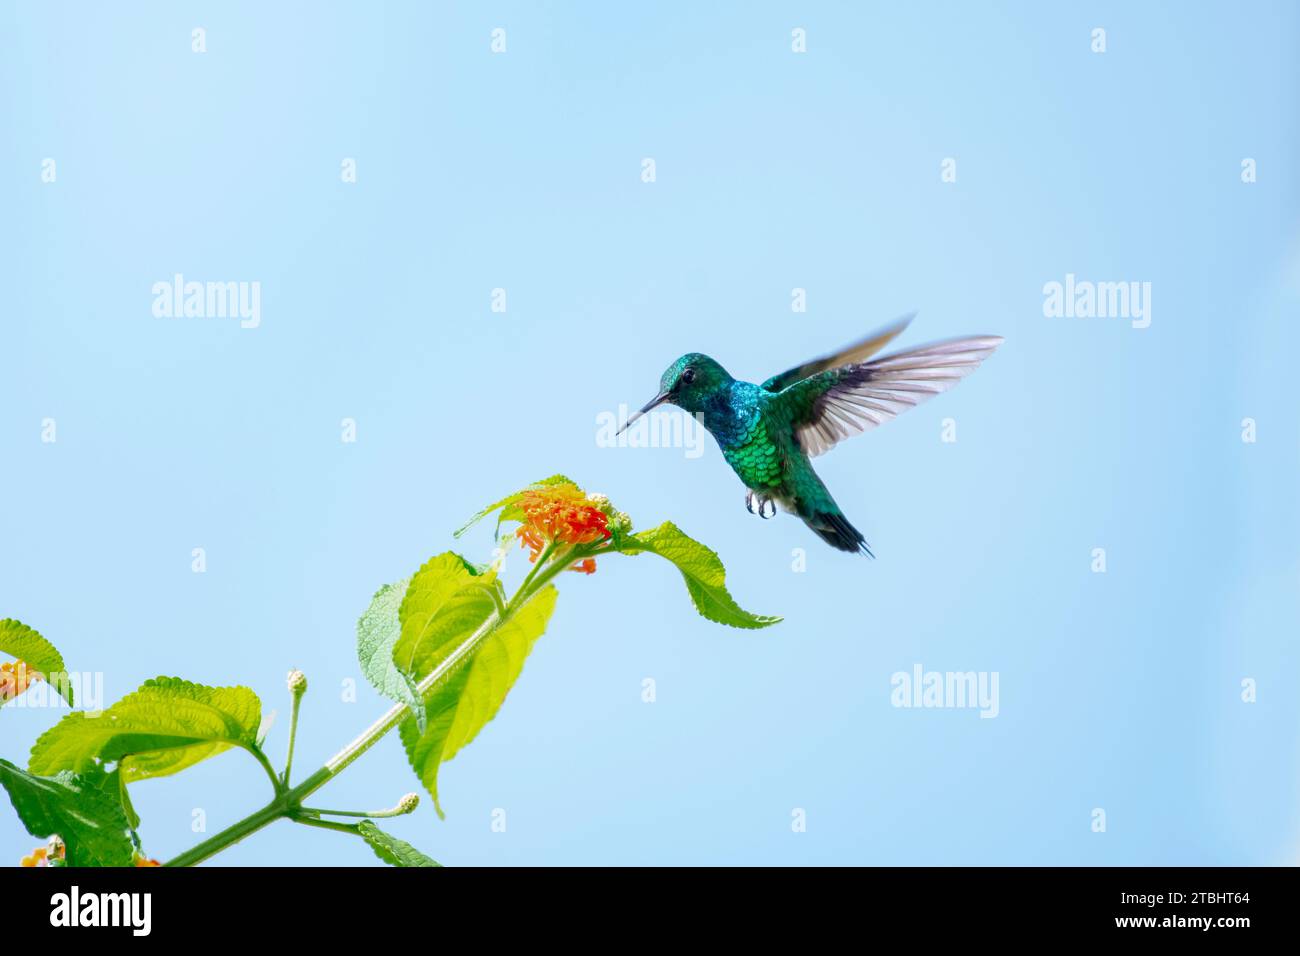 A male Blue-chinned Sapphire hummingbird, Chlorestes Notata, in flight in the blue sky with Lantana blooms Stock Photo